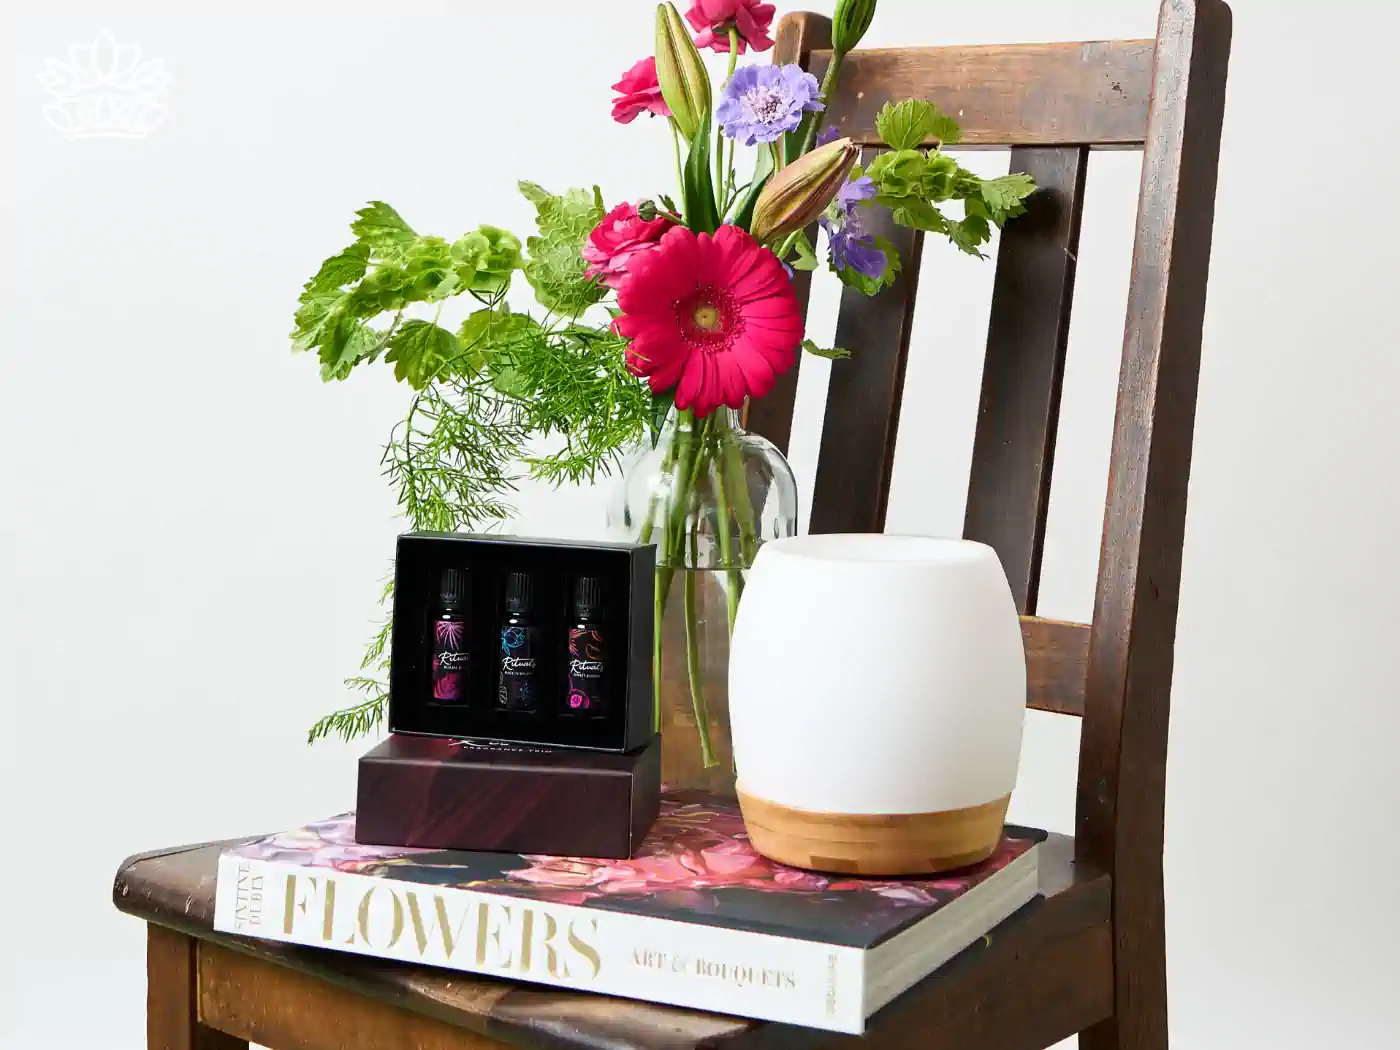 A tasteful housewarming gift setup displayed on an antique wooden chair, featuring a vibrant bouquet of fresh flowers in a clear vase, a box of essential oils, and a stylish aroma diffuser on top of a 'Flowers: Art & Bouquets' book. Perfectly blending nature with home comfort. Fabulous Flowers and Gifts.